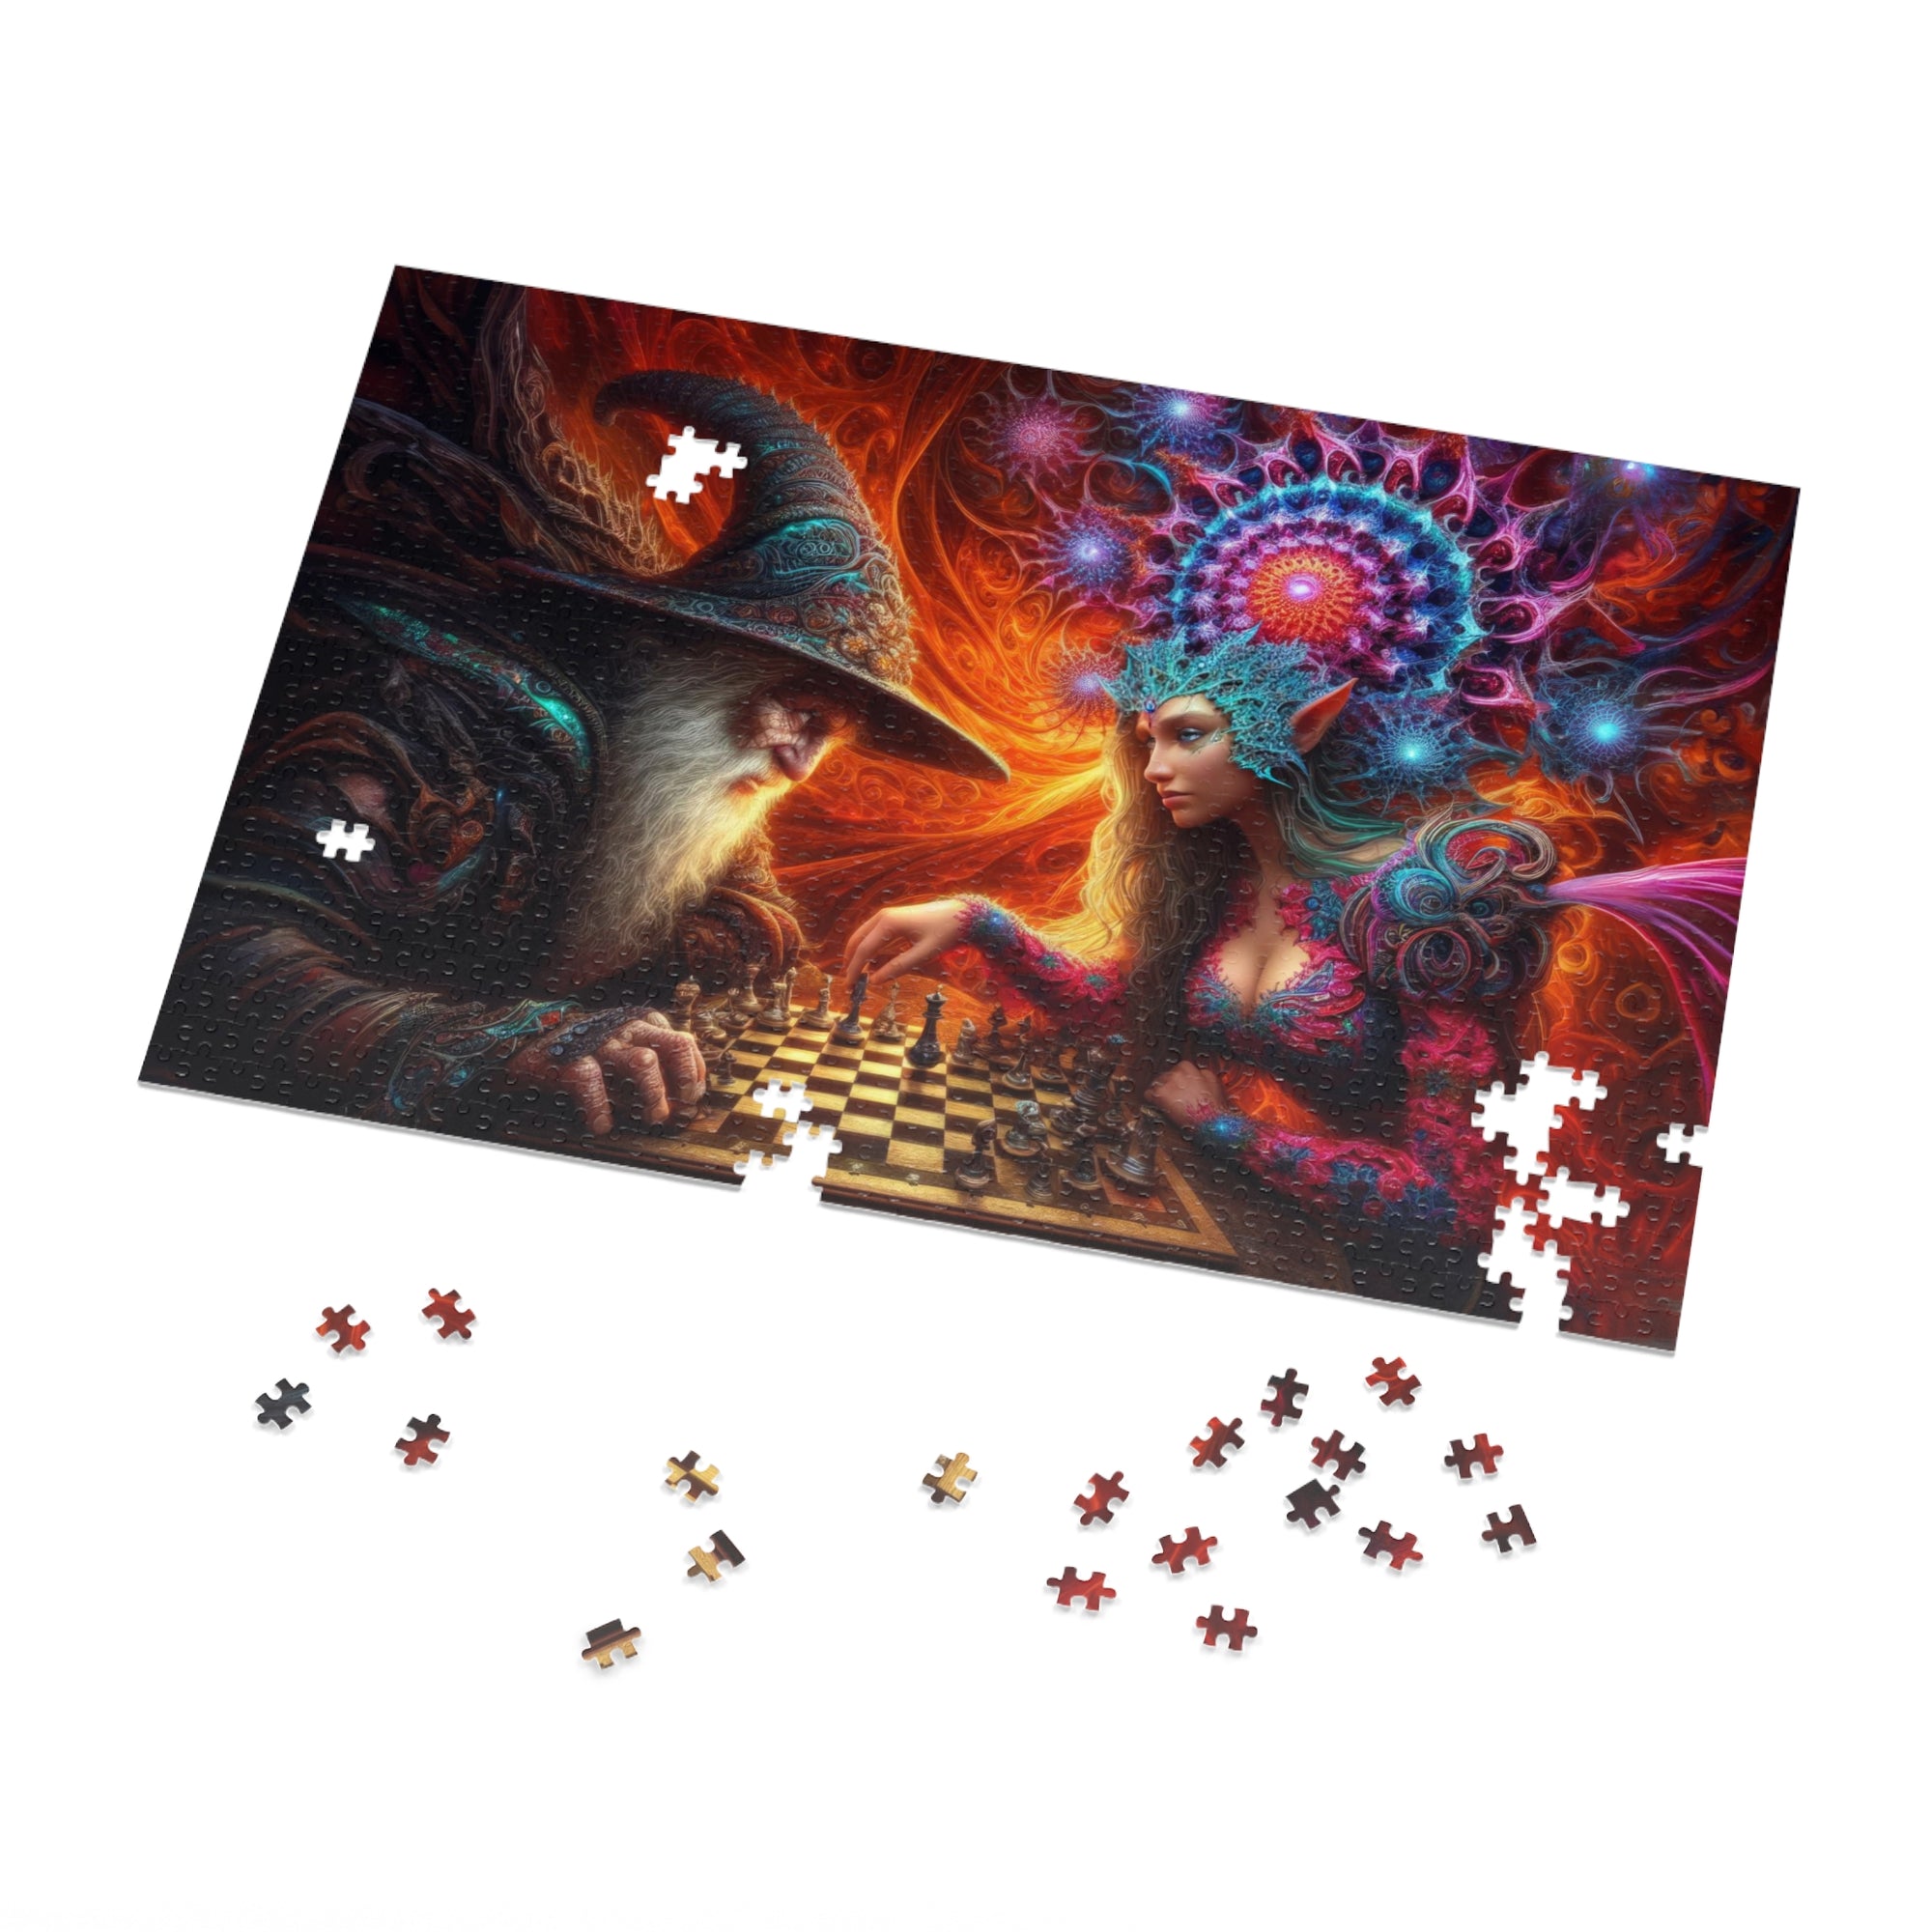 Checkmate of Enchantment Jigsaw Puzzle